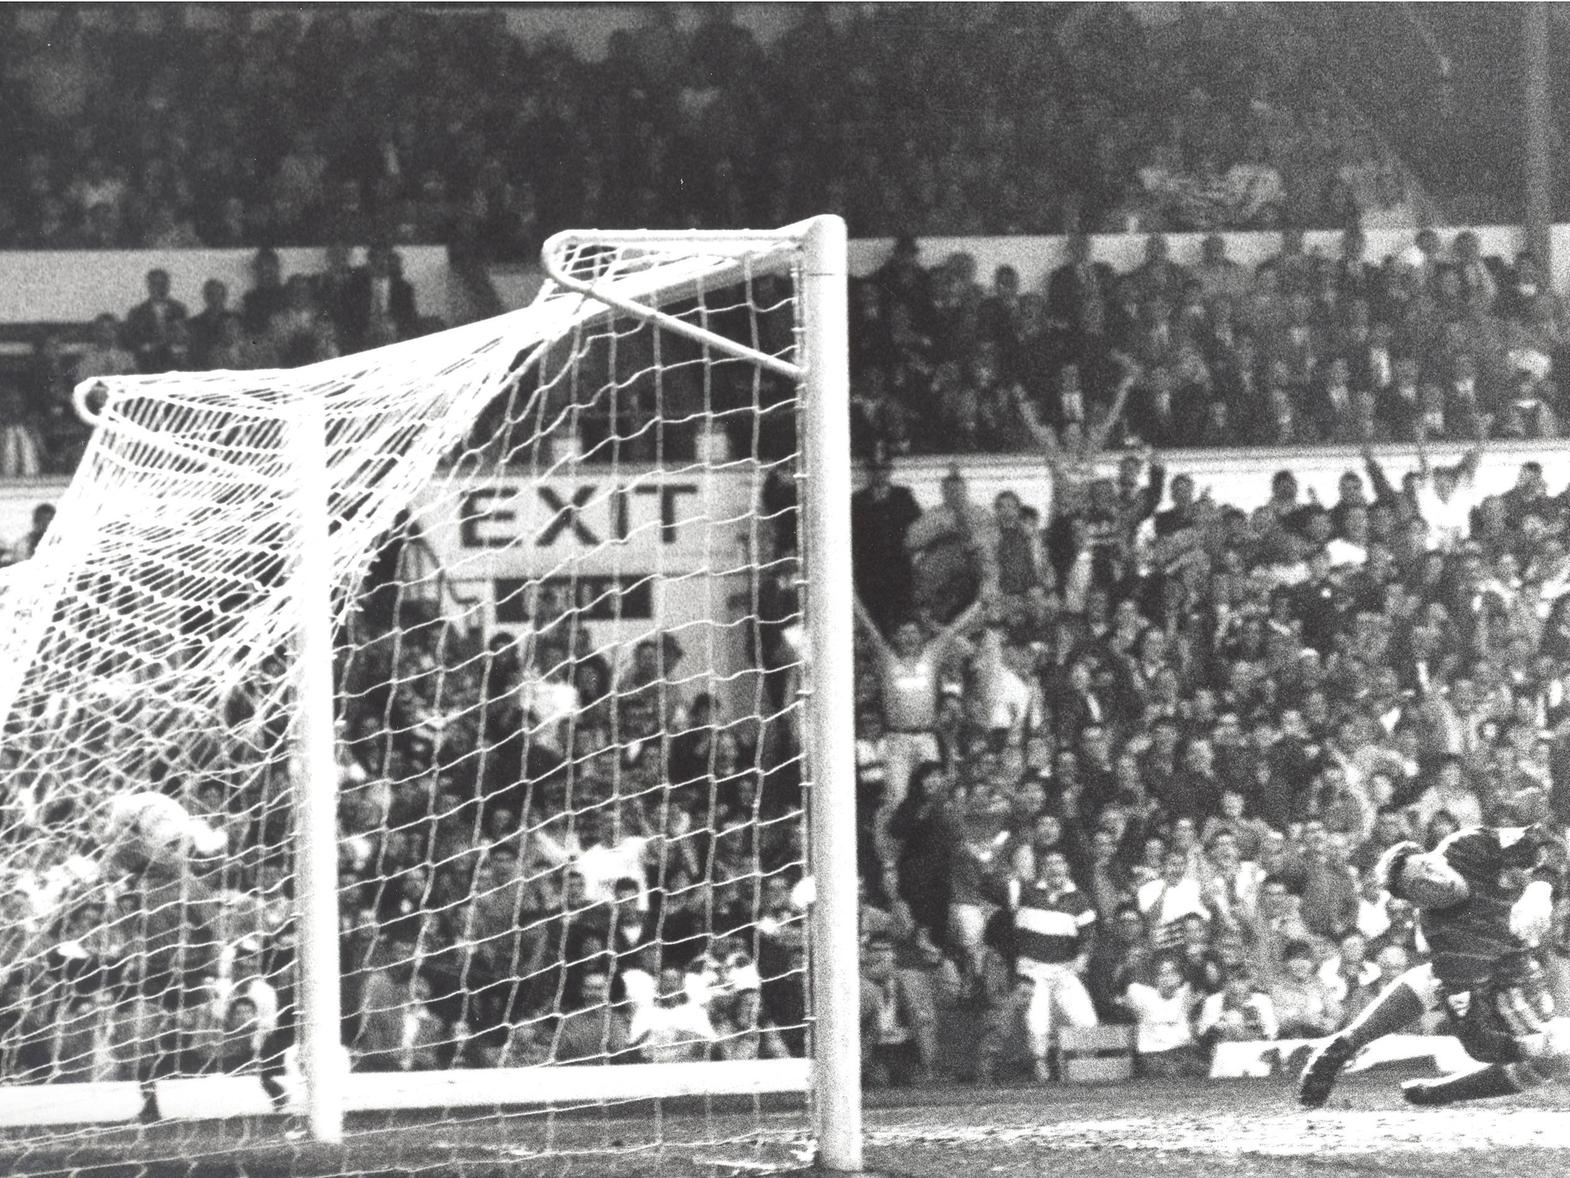 A despairing dive from Tony Coton as David Rocastle's shot hits the back of the net.